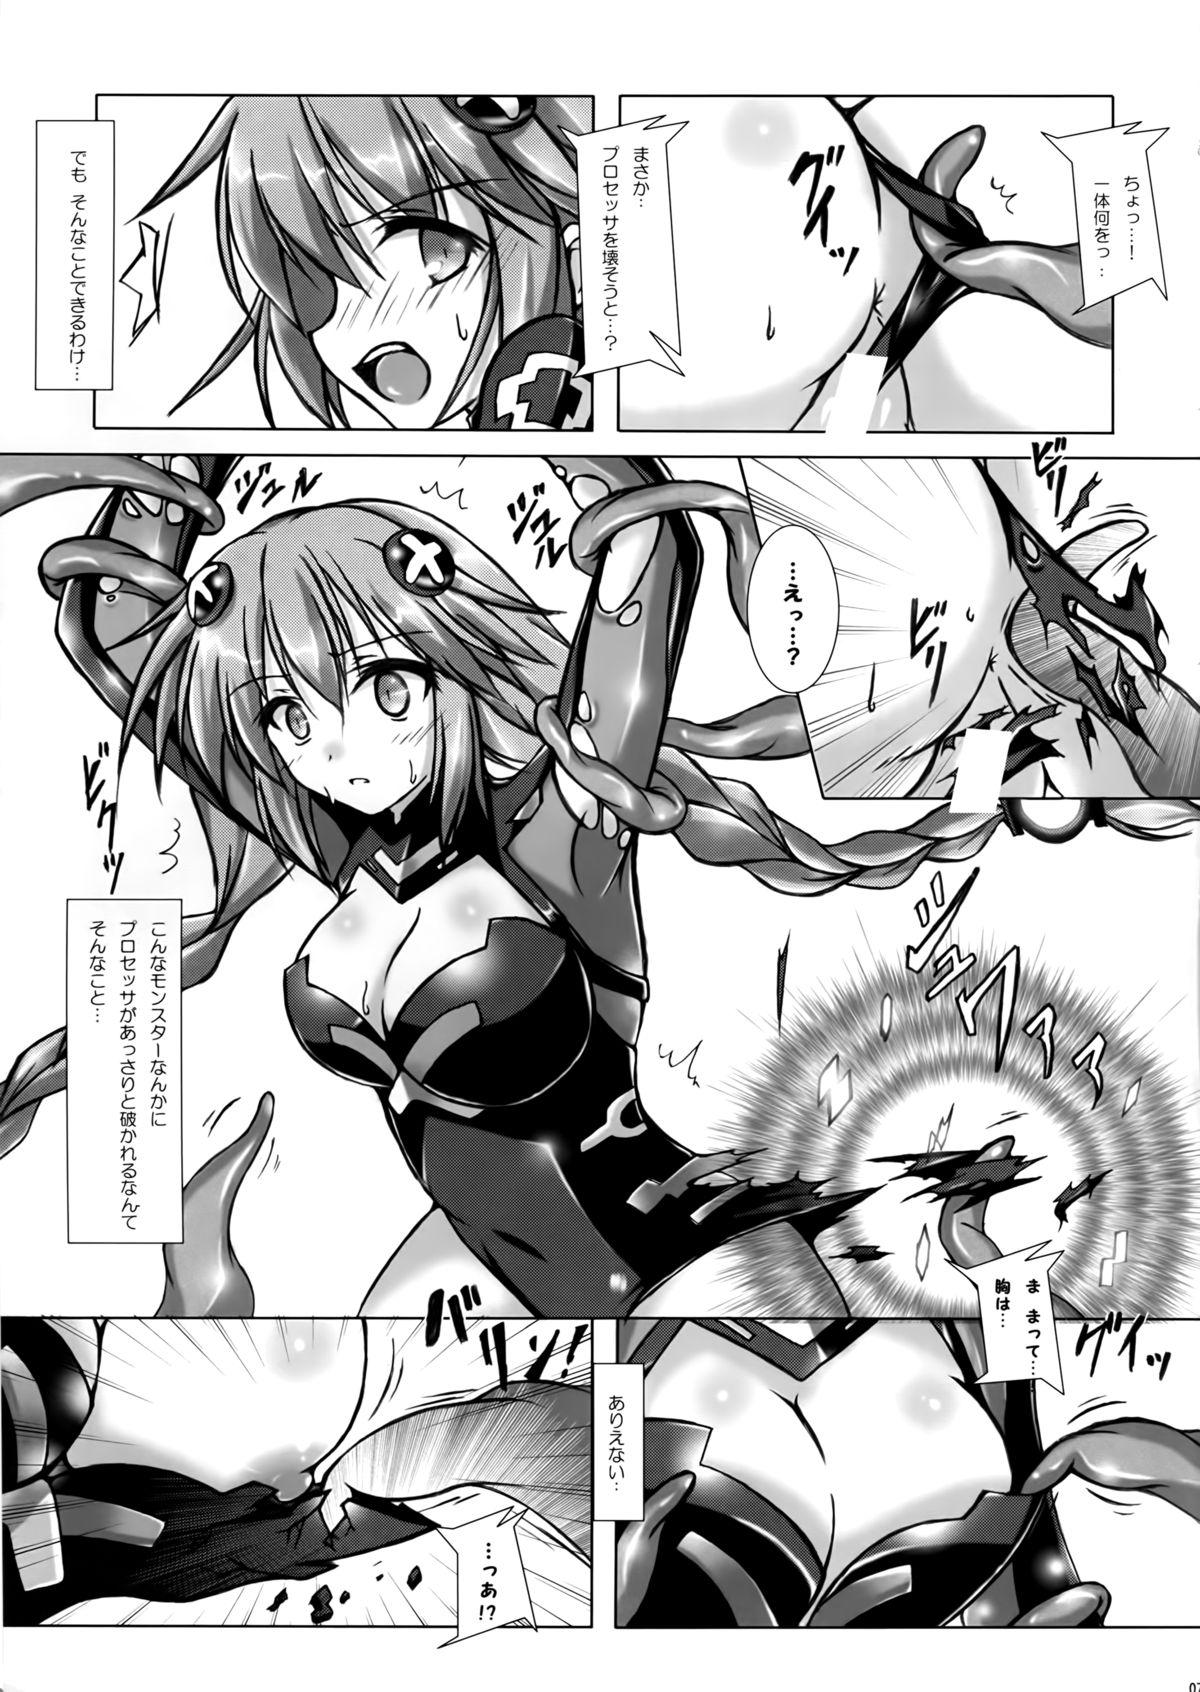 Fetish Tentacle Syndrome - Hyperdimension neptunia Colombiana - Page 7